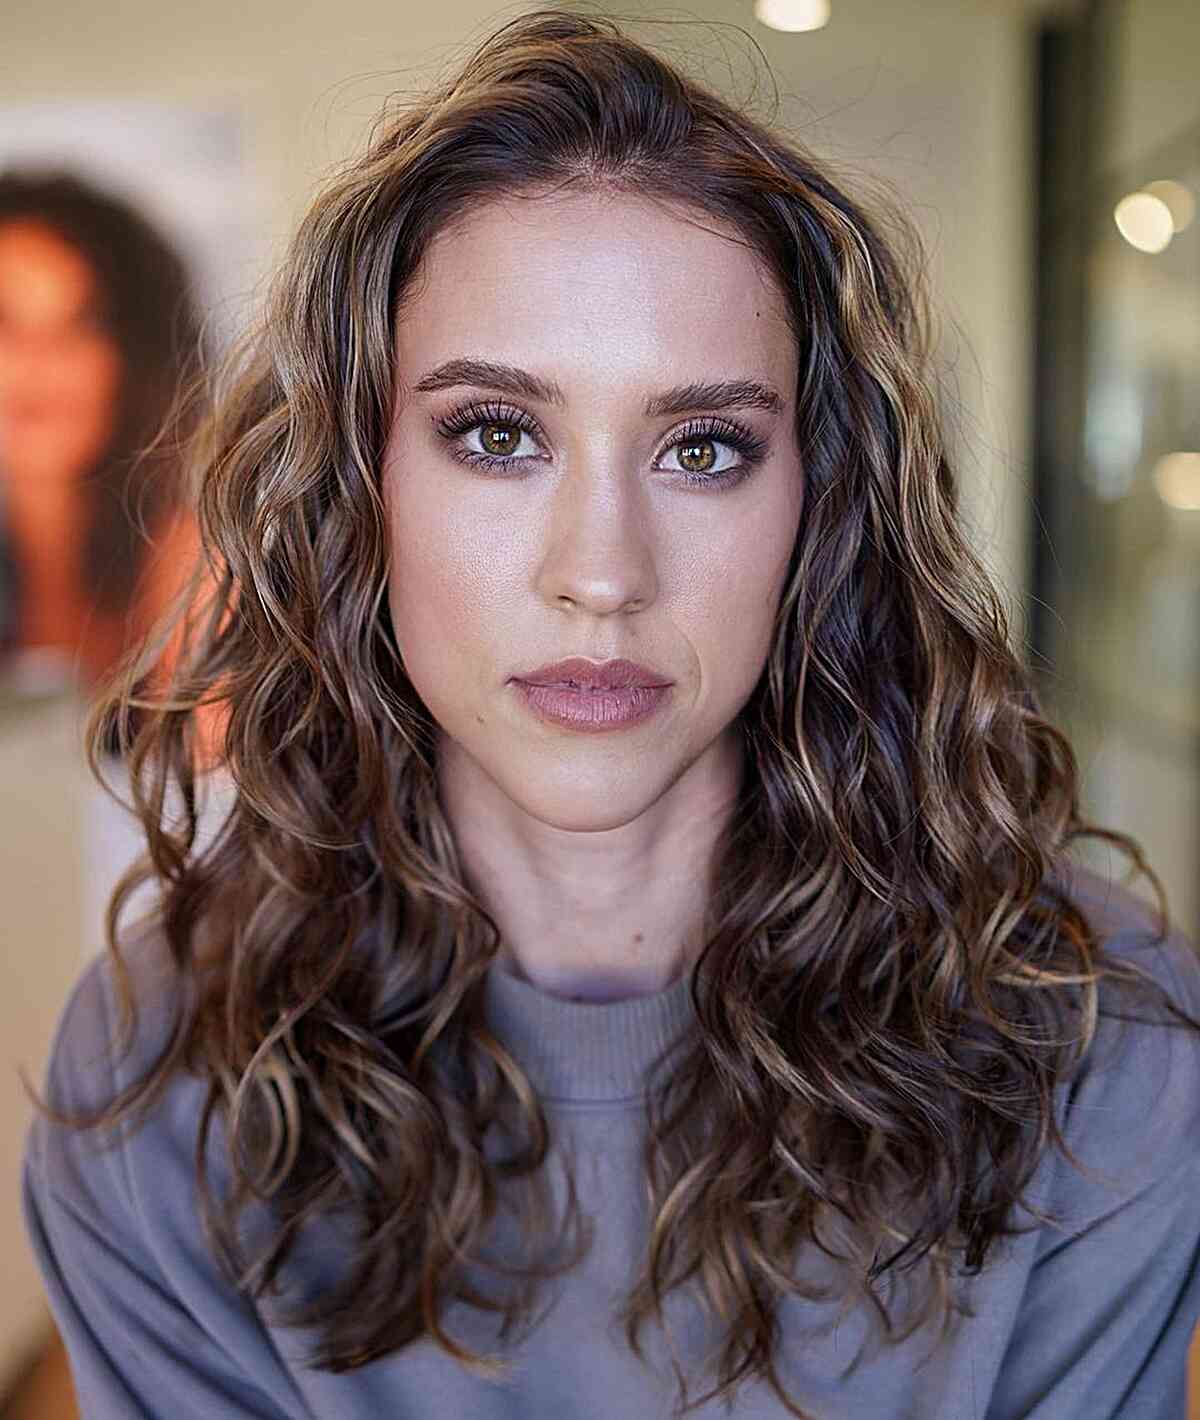 Modern Loose Curls for mid-length hair for women who do not want bangs